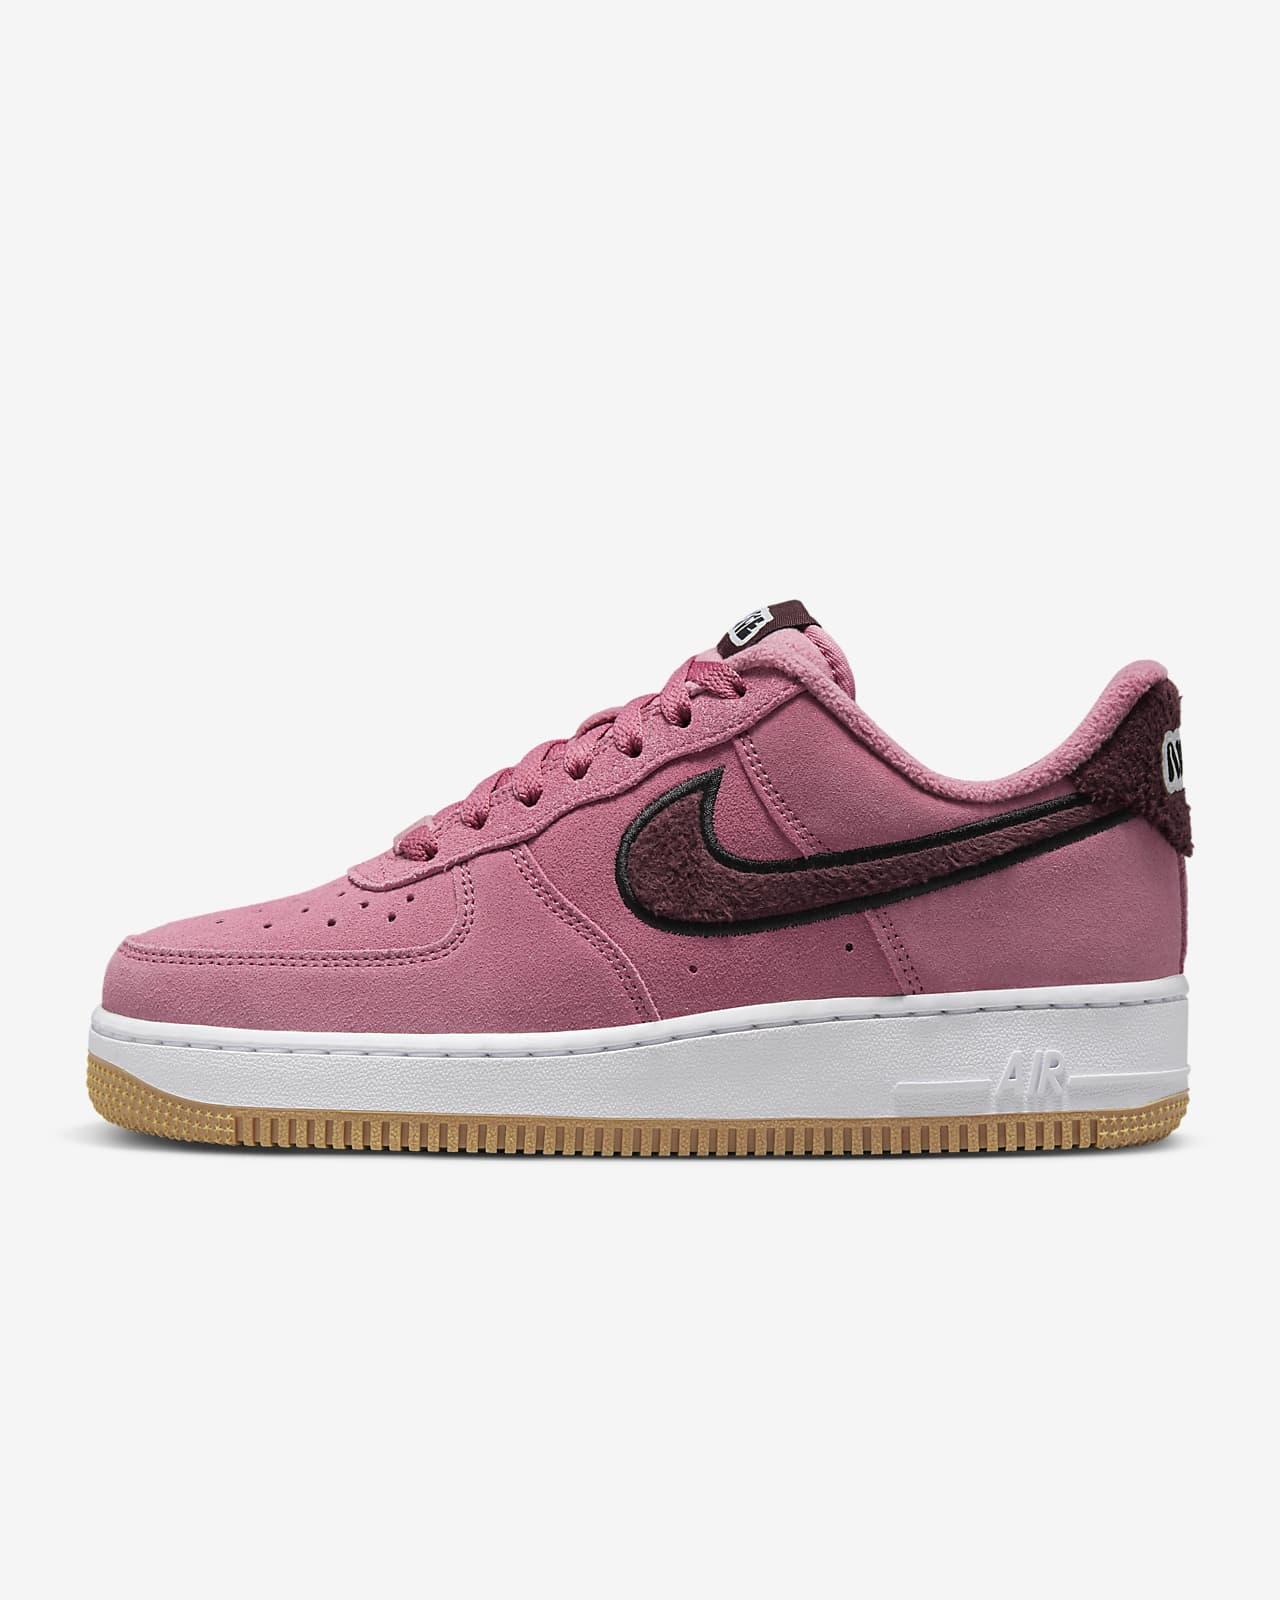 Prominente Polvoriento arco Nike Air Force 1 '07 SE Zapatillas - Mujer. Nike ES